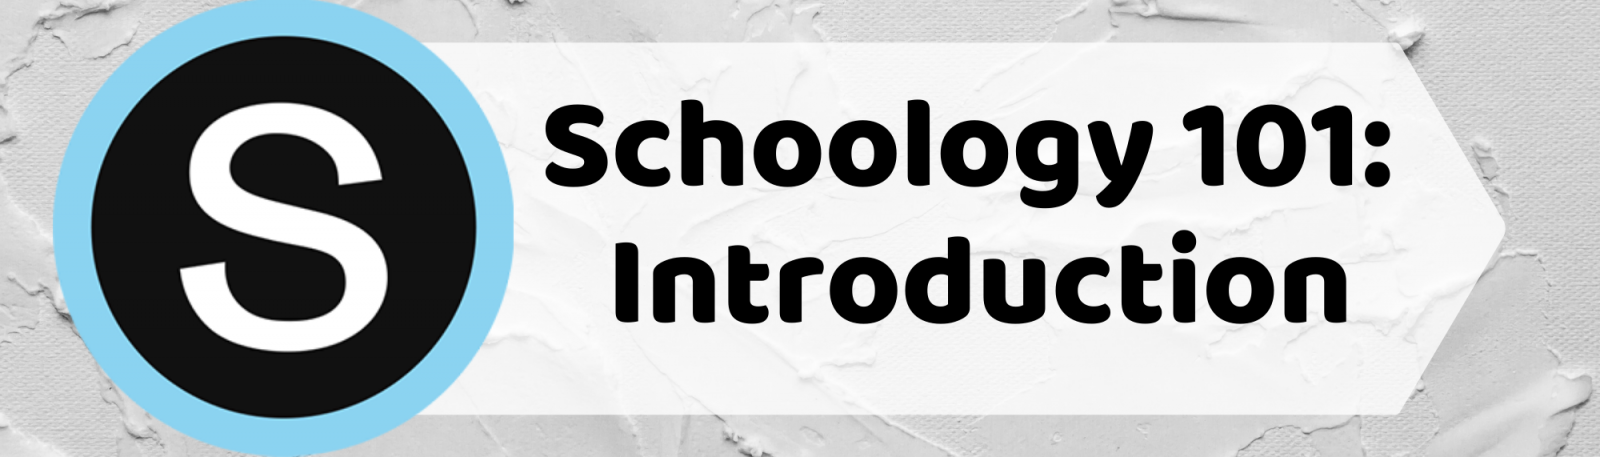 Schoology 101 | Introduction